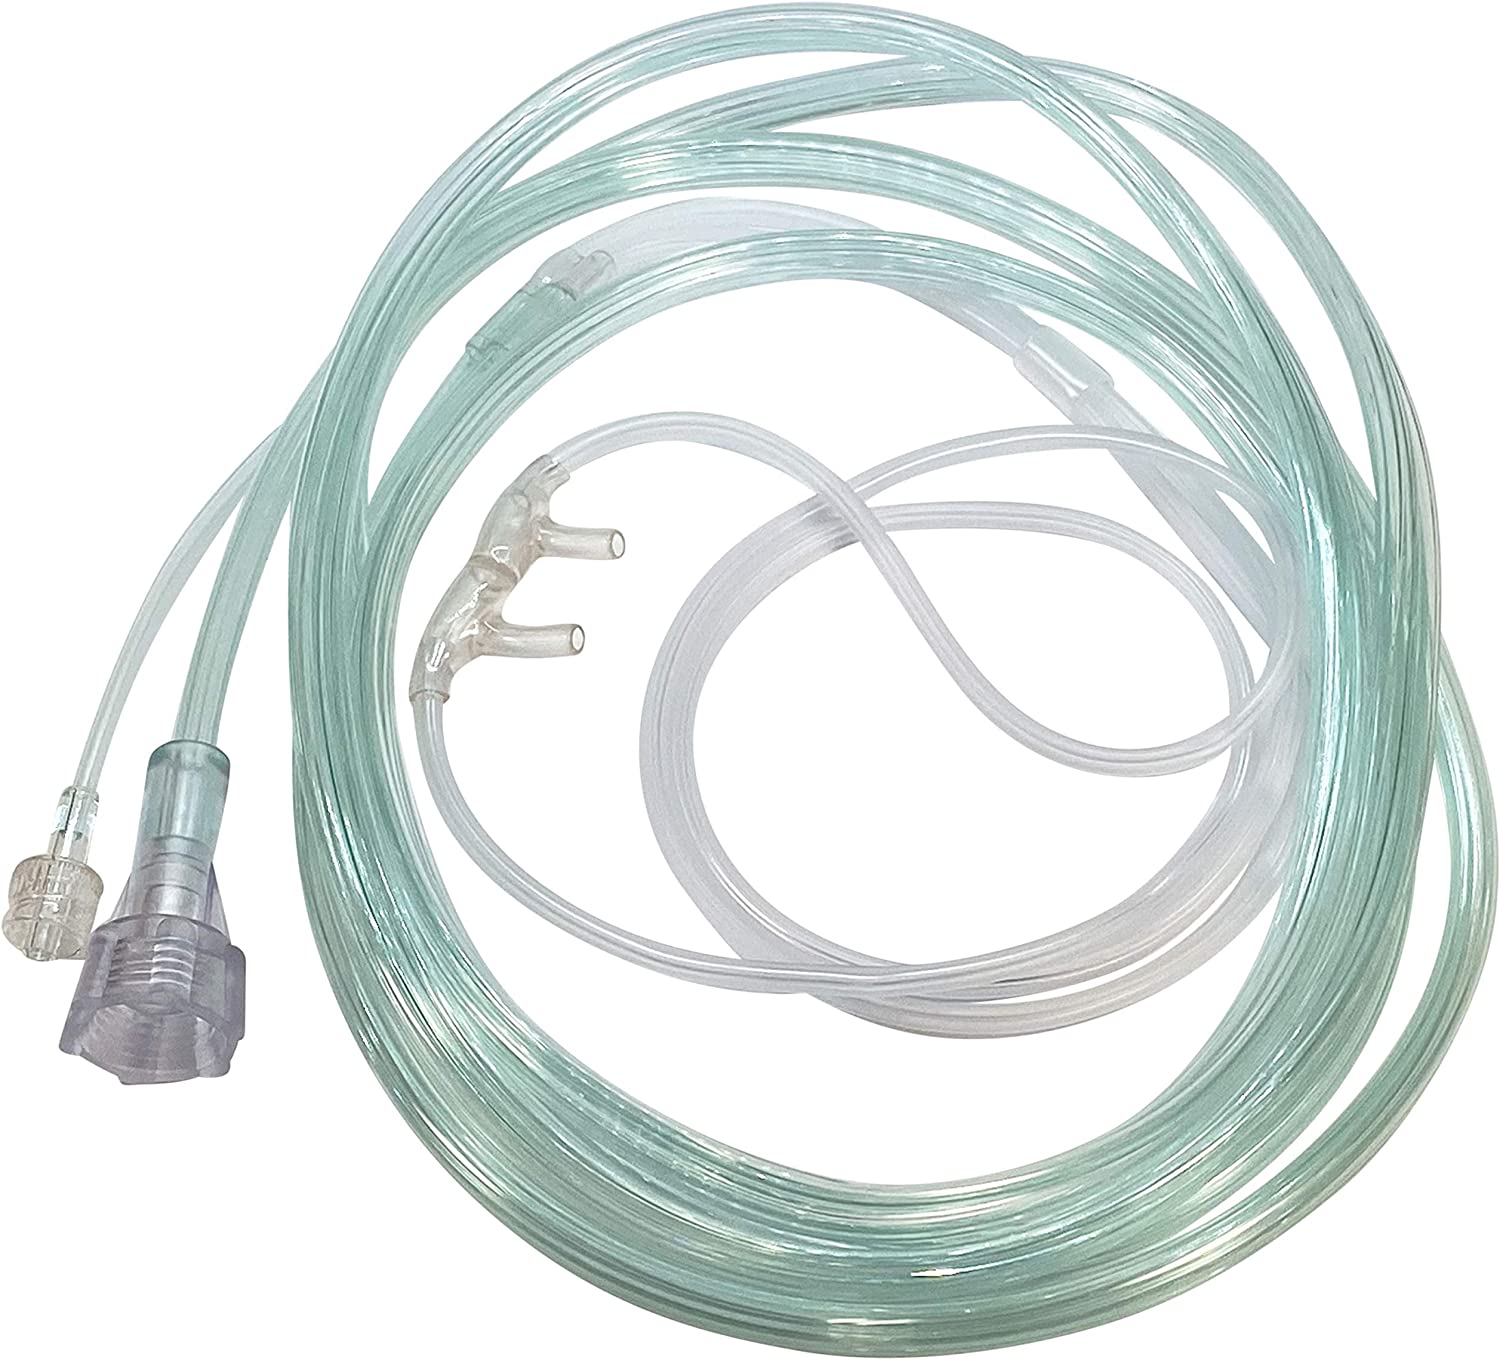 Westmed #0503 Comfort Soft Plus CO2/O2 Cannula with Threaded Nut & 7' Kink Resistant Tubing